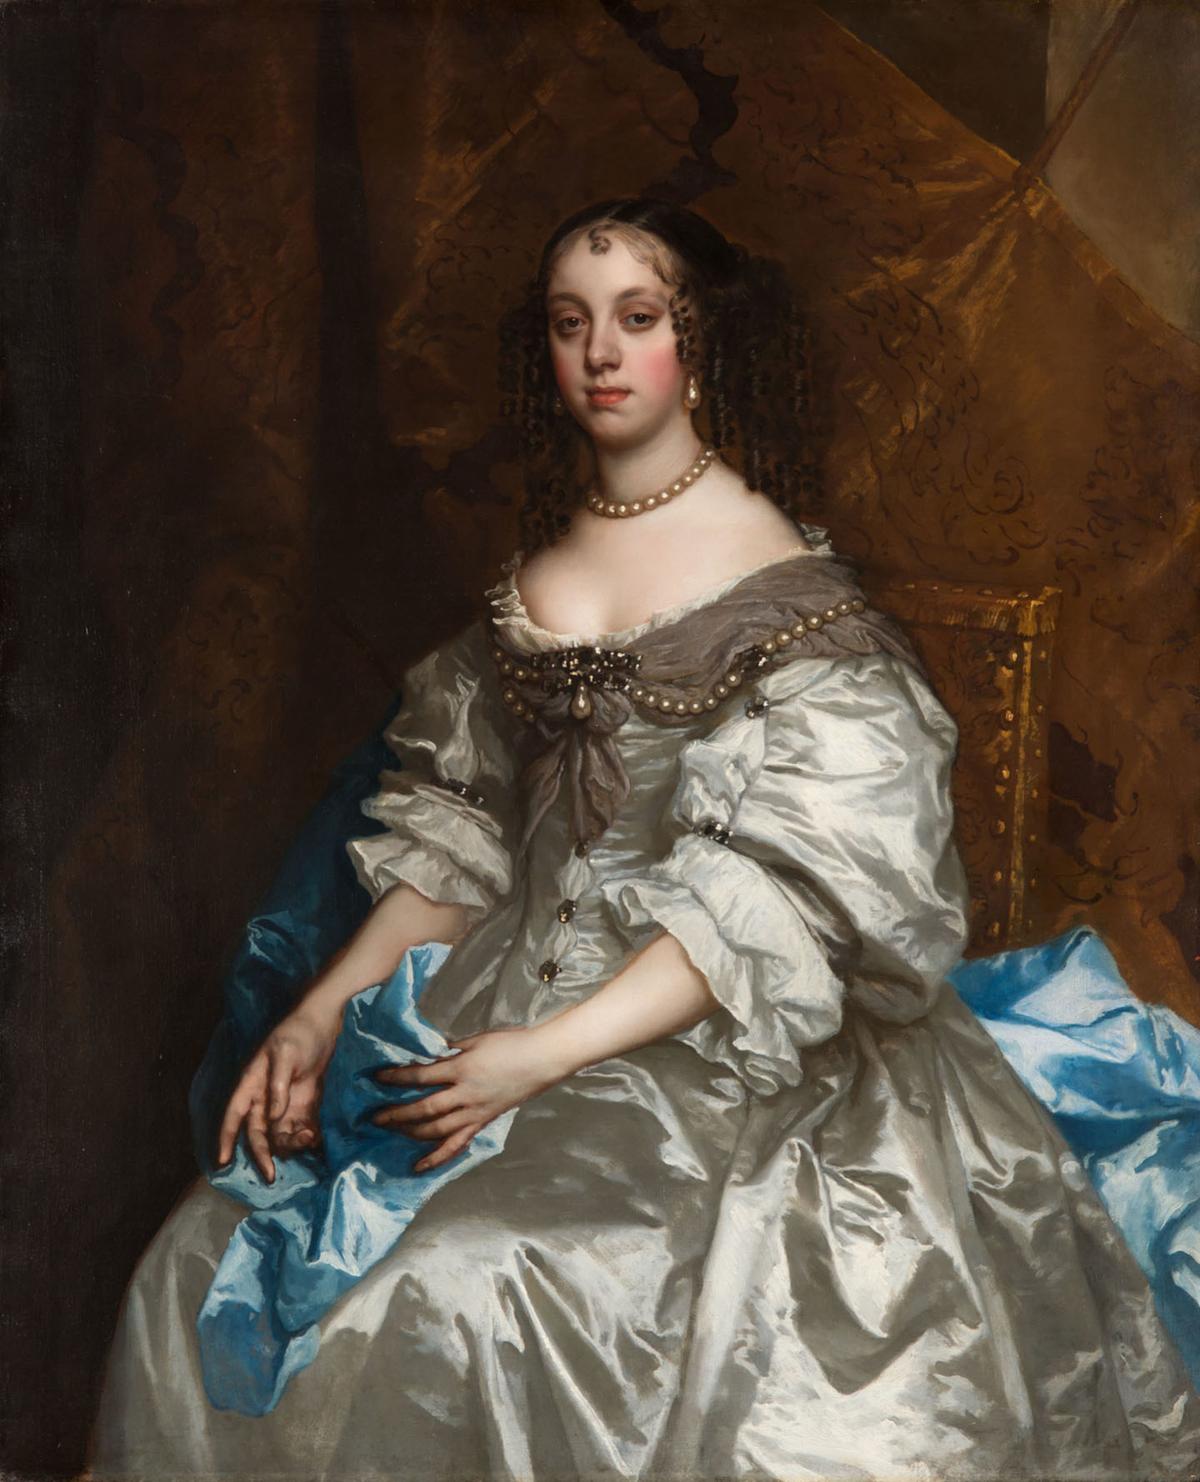 A portrait of Catherine of Braganza, from 1663 until 1665, by Peter Lely. Oil on canvas; 49 3/10 inches by 40 2/5 inches. Royal Collection, UK. (Public Domain)